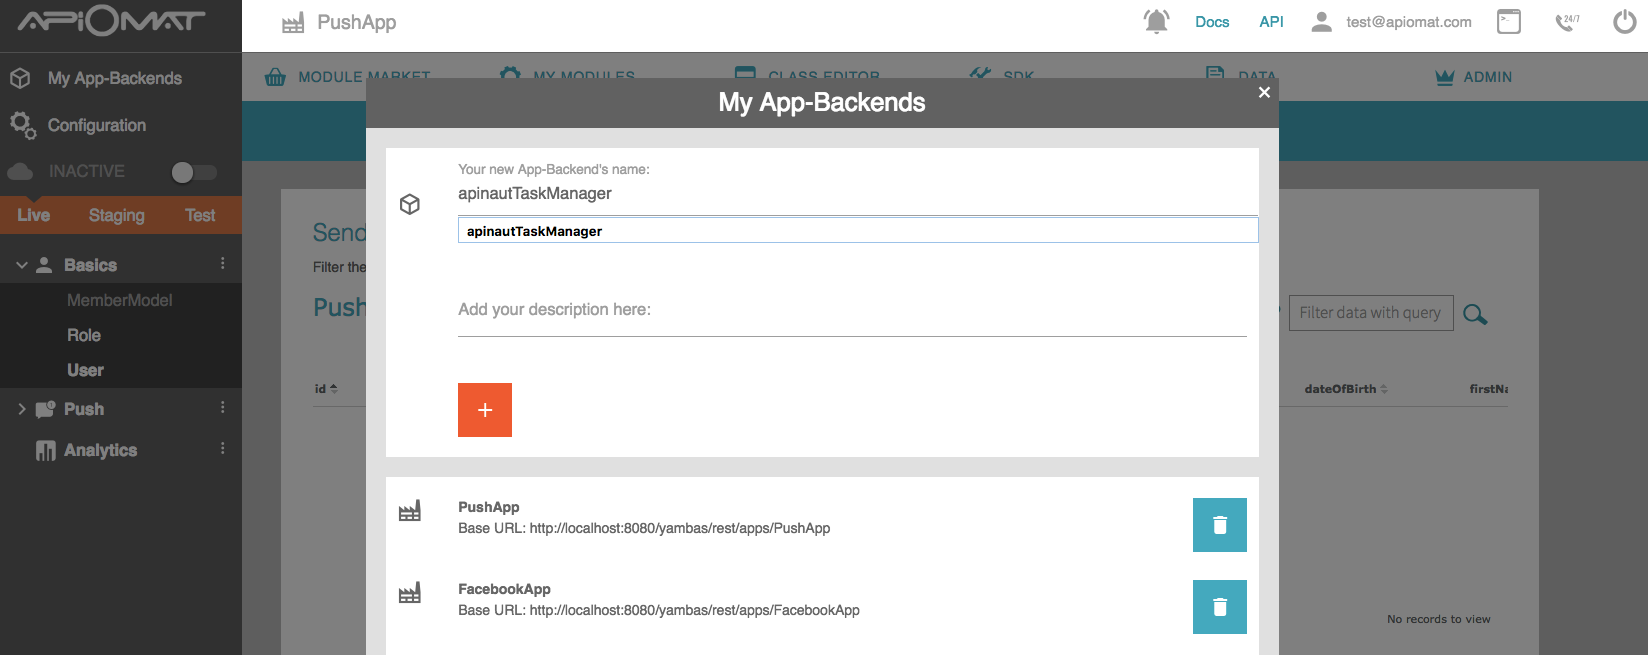 images/download/attachments/61495158/taskManager_newBackend.png